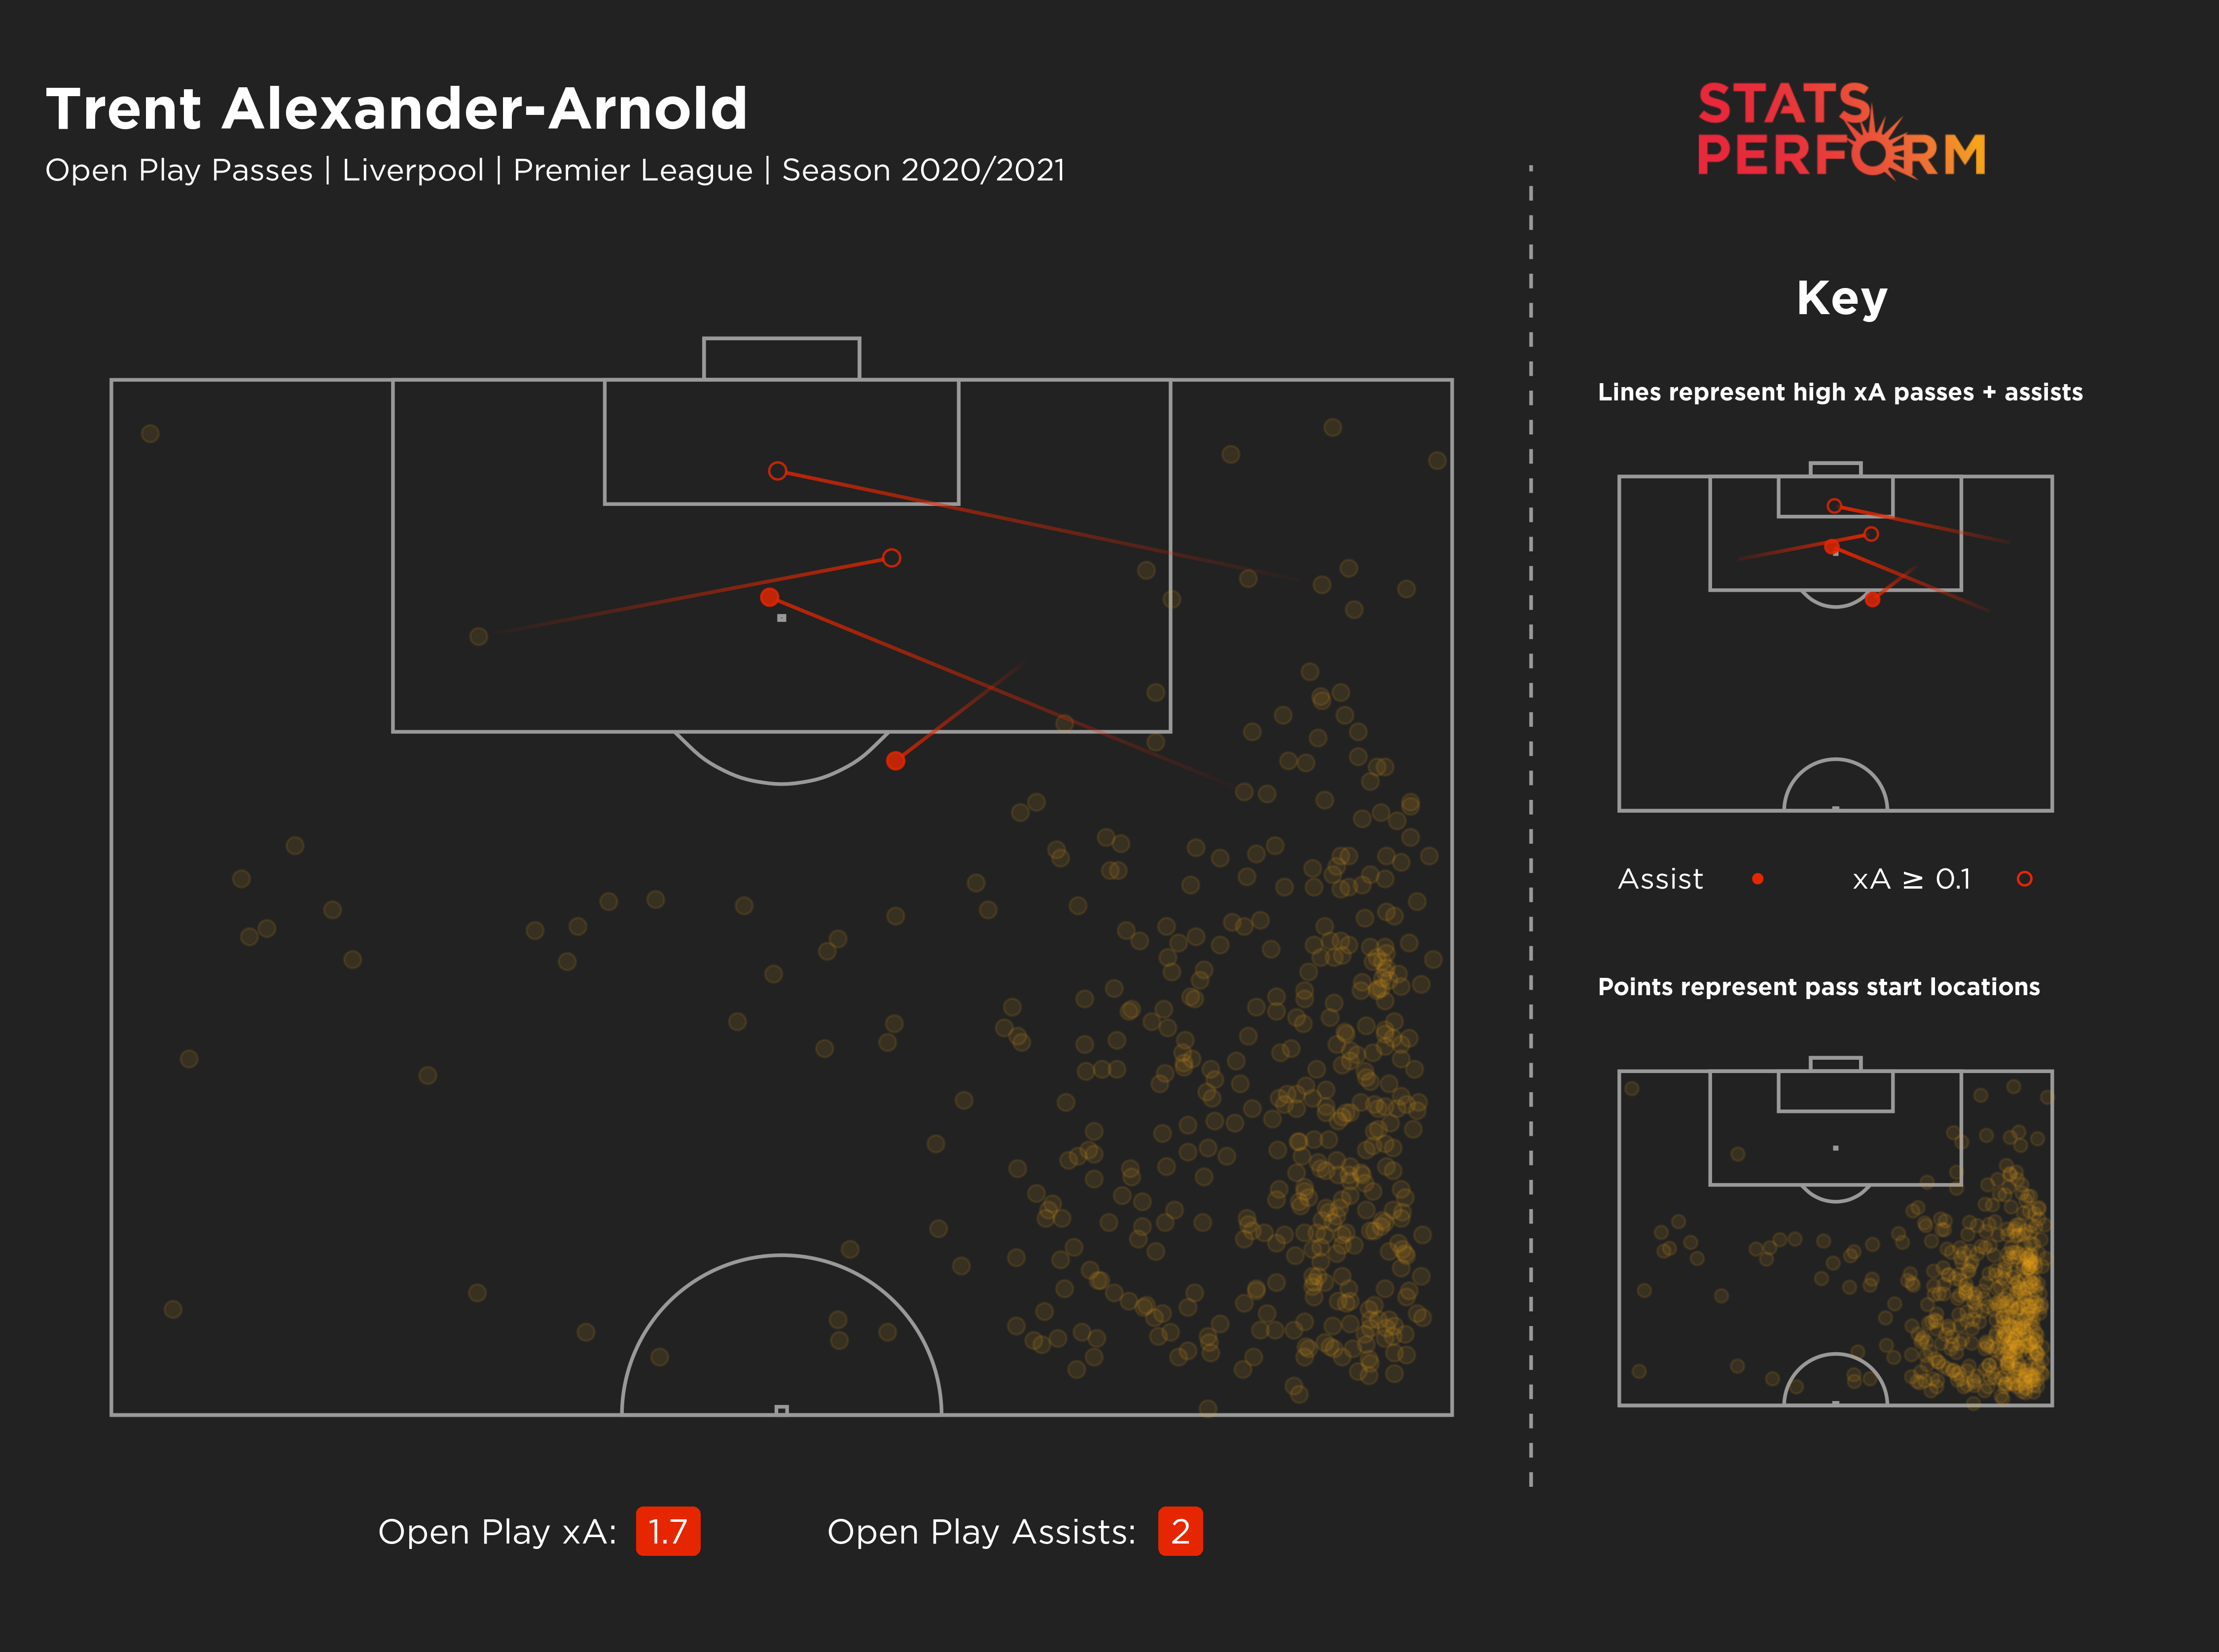 Trent Alexander-Arnold's assists map in the Premier League this season